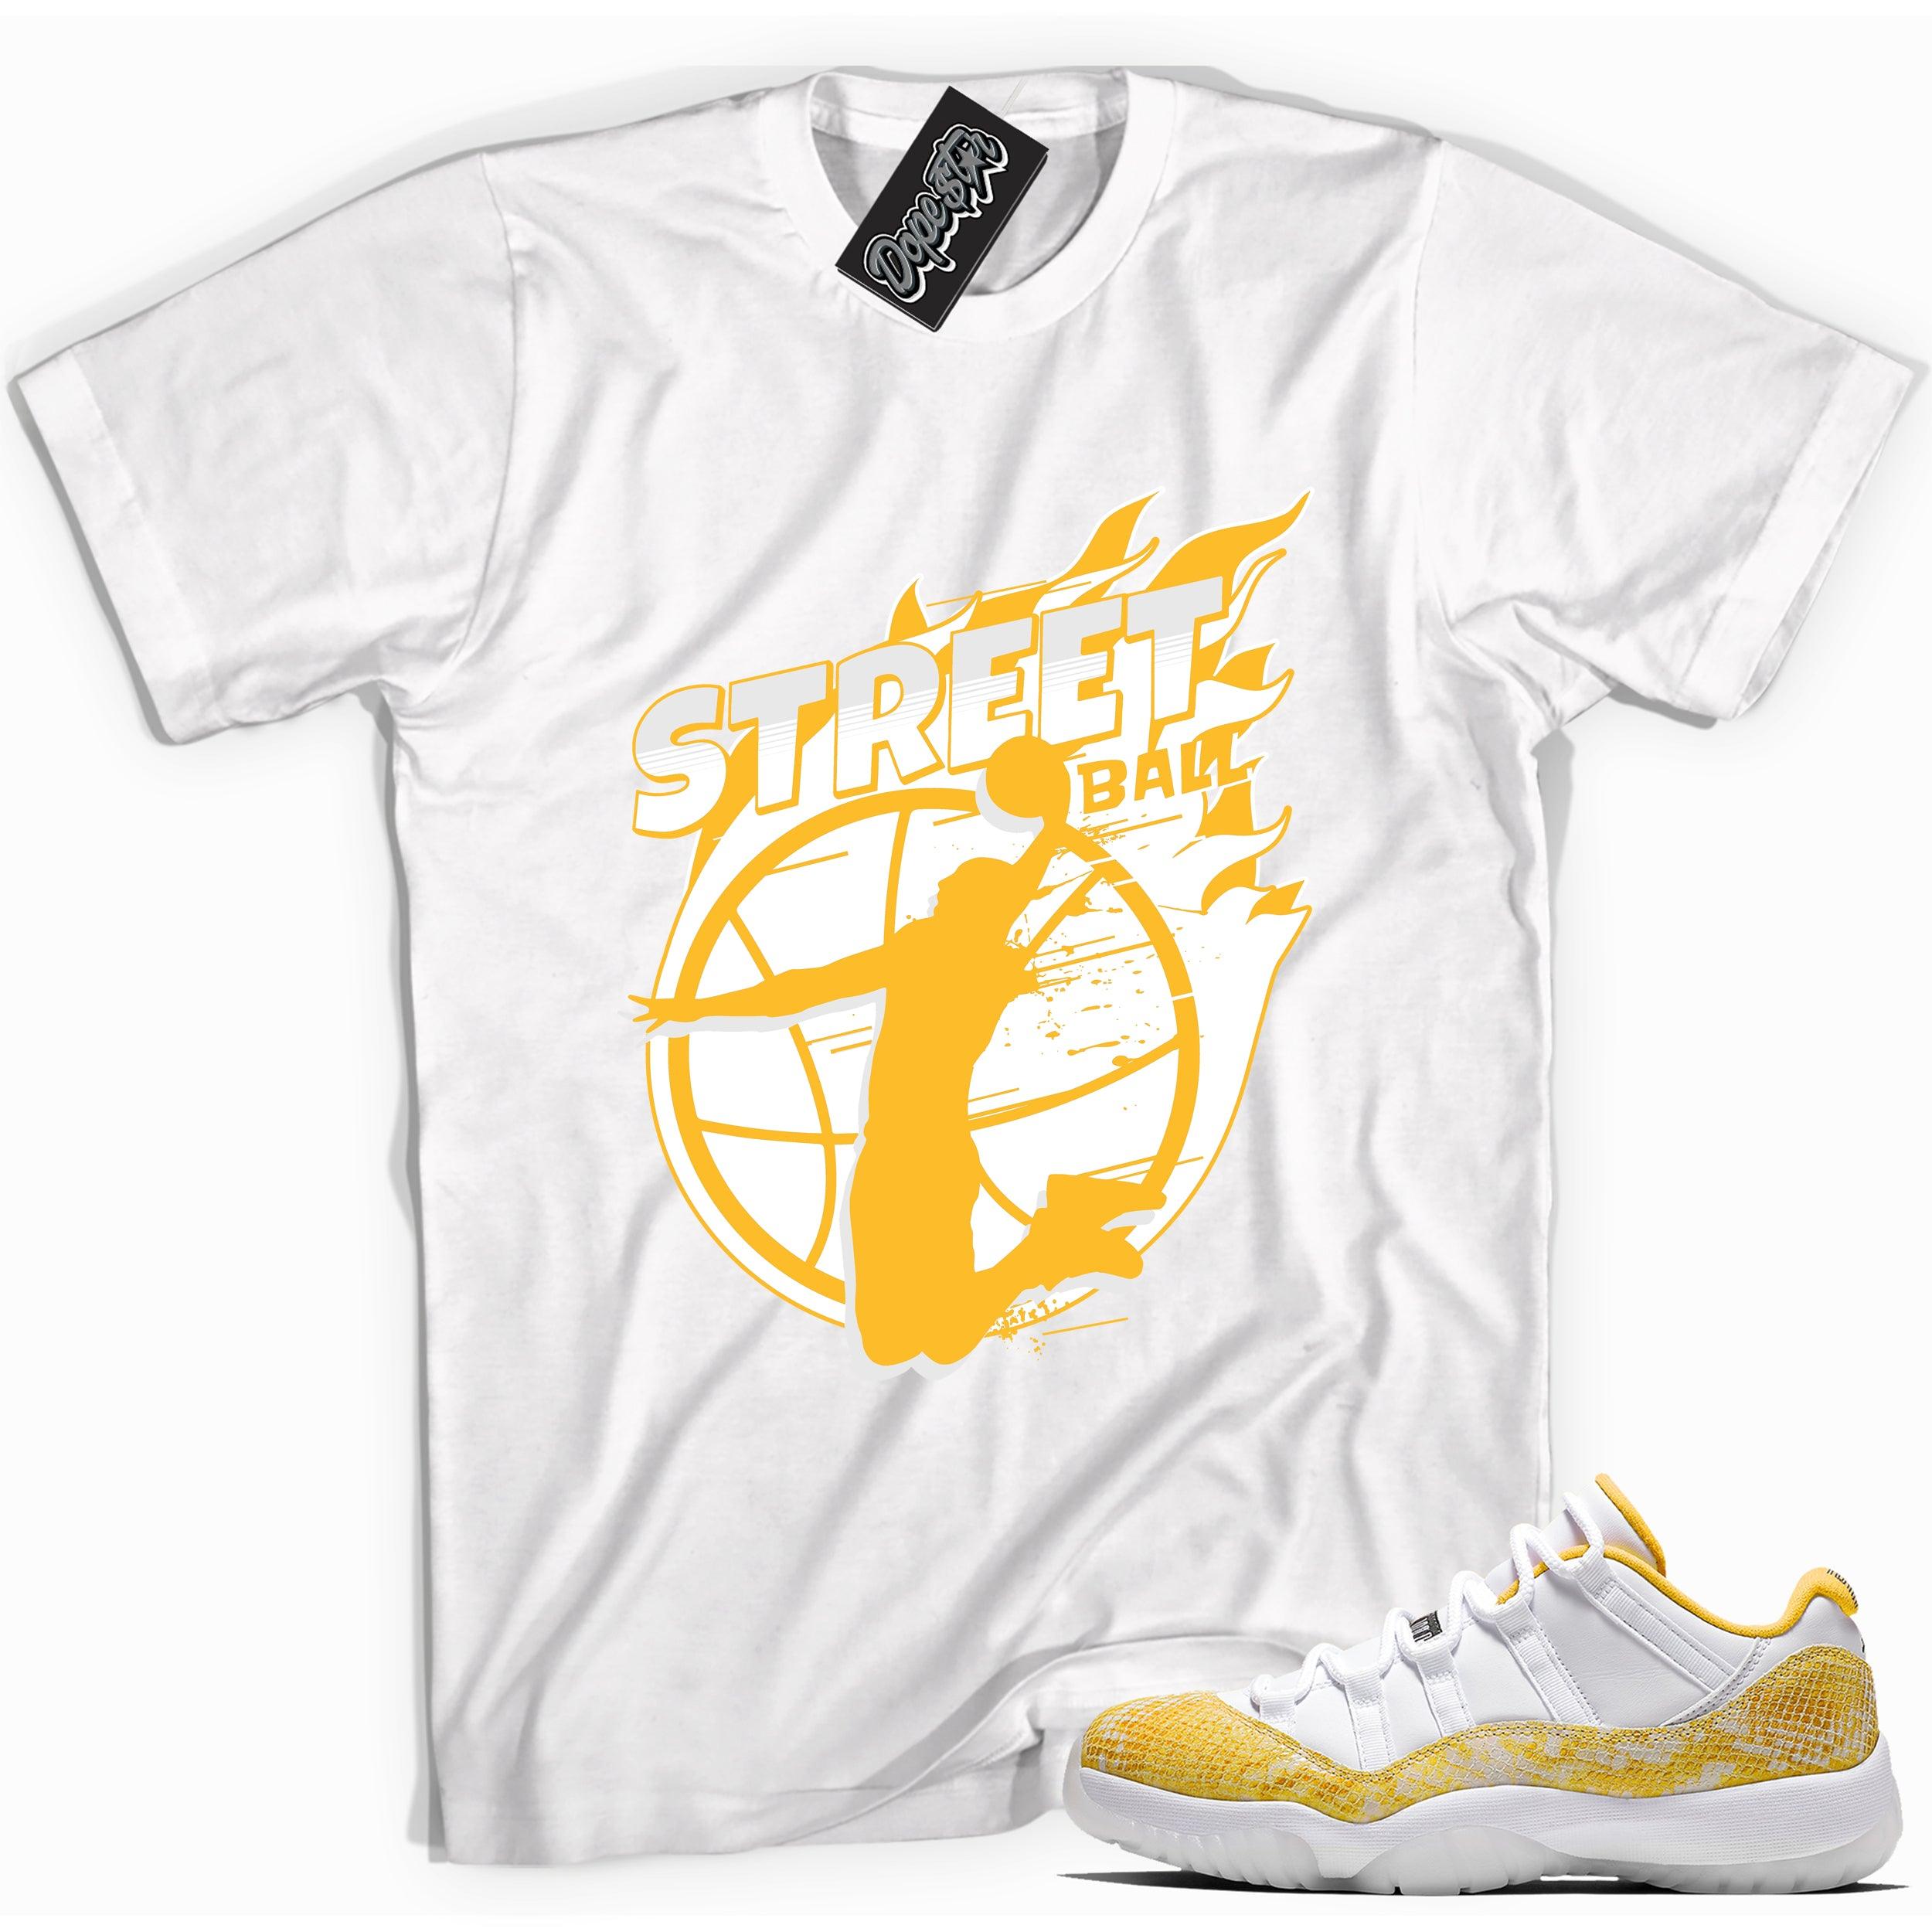 Cool white graphic tee with 'street ball' print, that perfectly matches Air Jordan 11 Retro Low Yellow Snakeskin sneakers